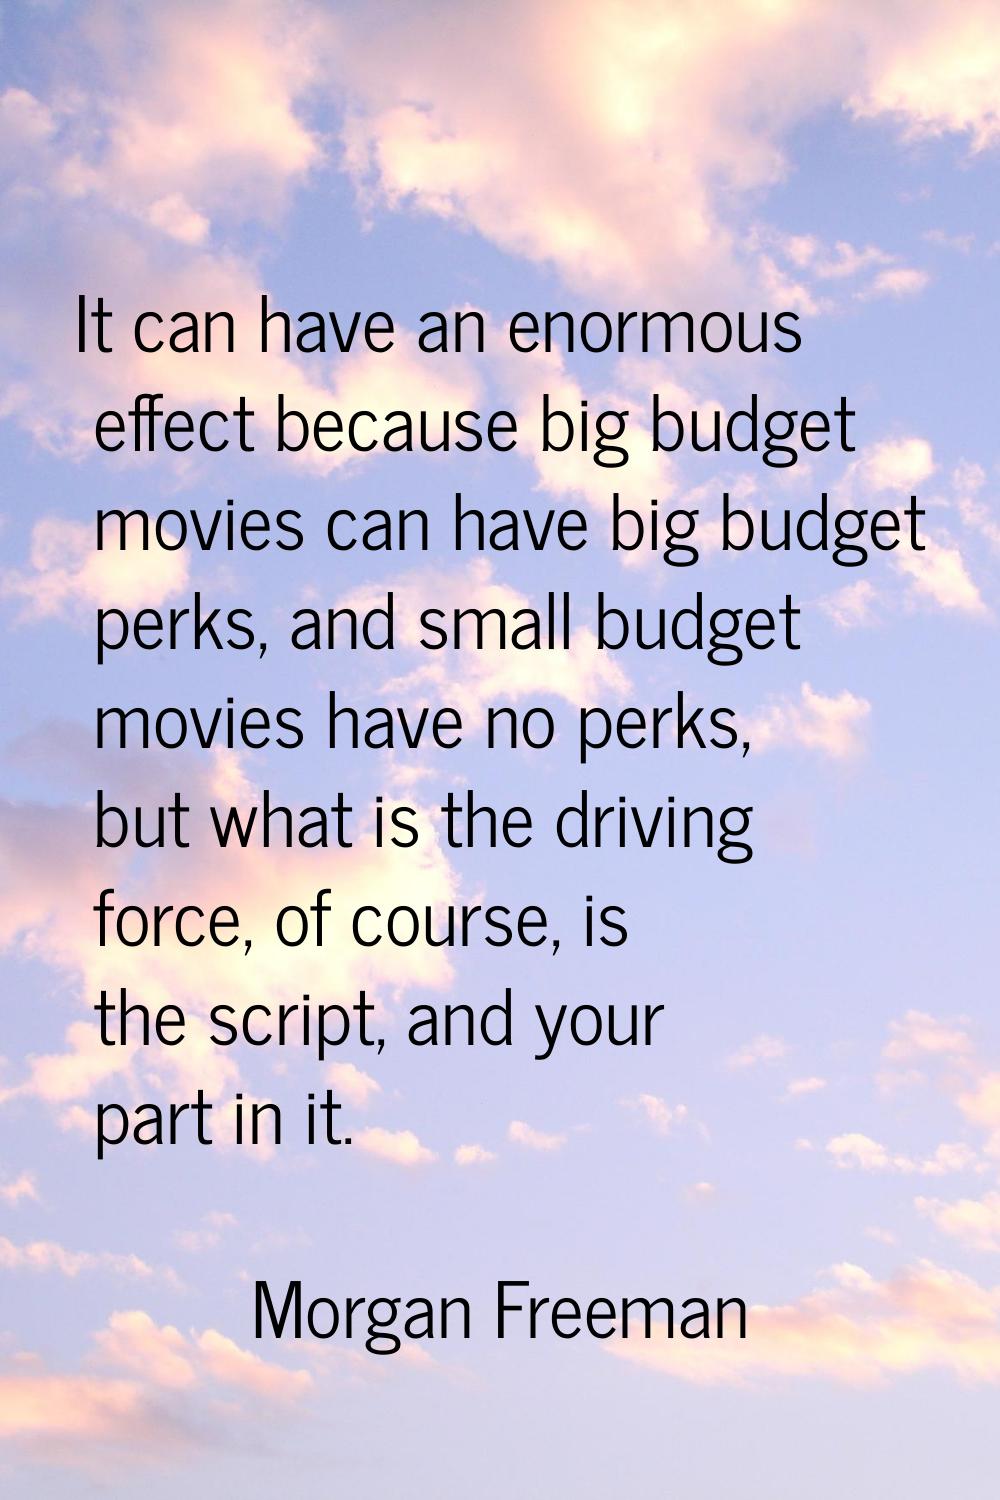 It can have an enormous effect because big budget movies can have big budget perks, and small budge